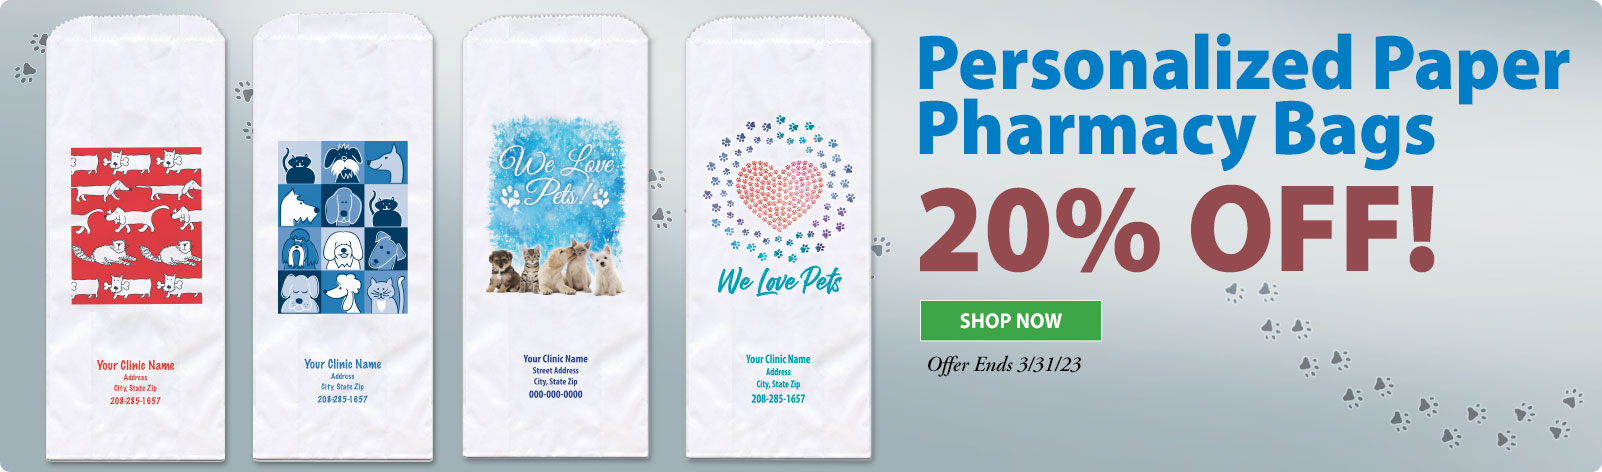 Our veterinary pharmacy bags are the perfect way to send your clients home with pet medications, vitamins and samples.